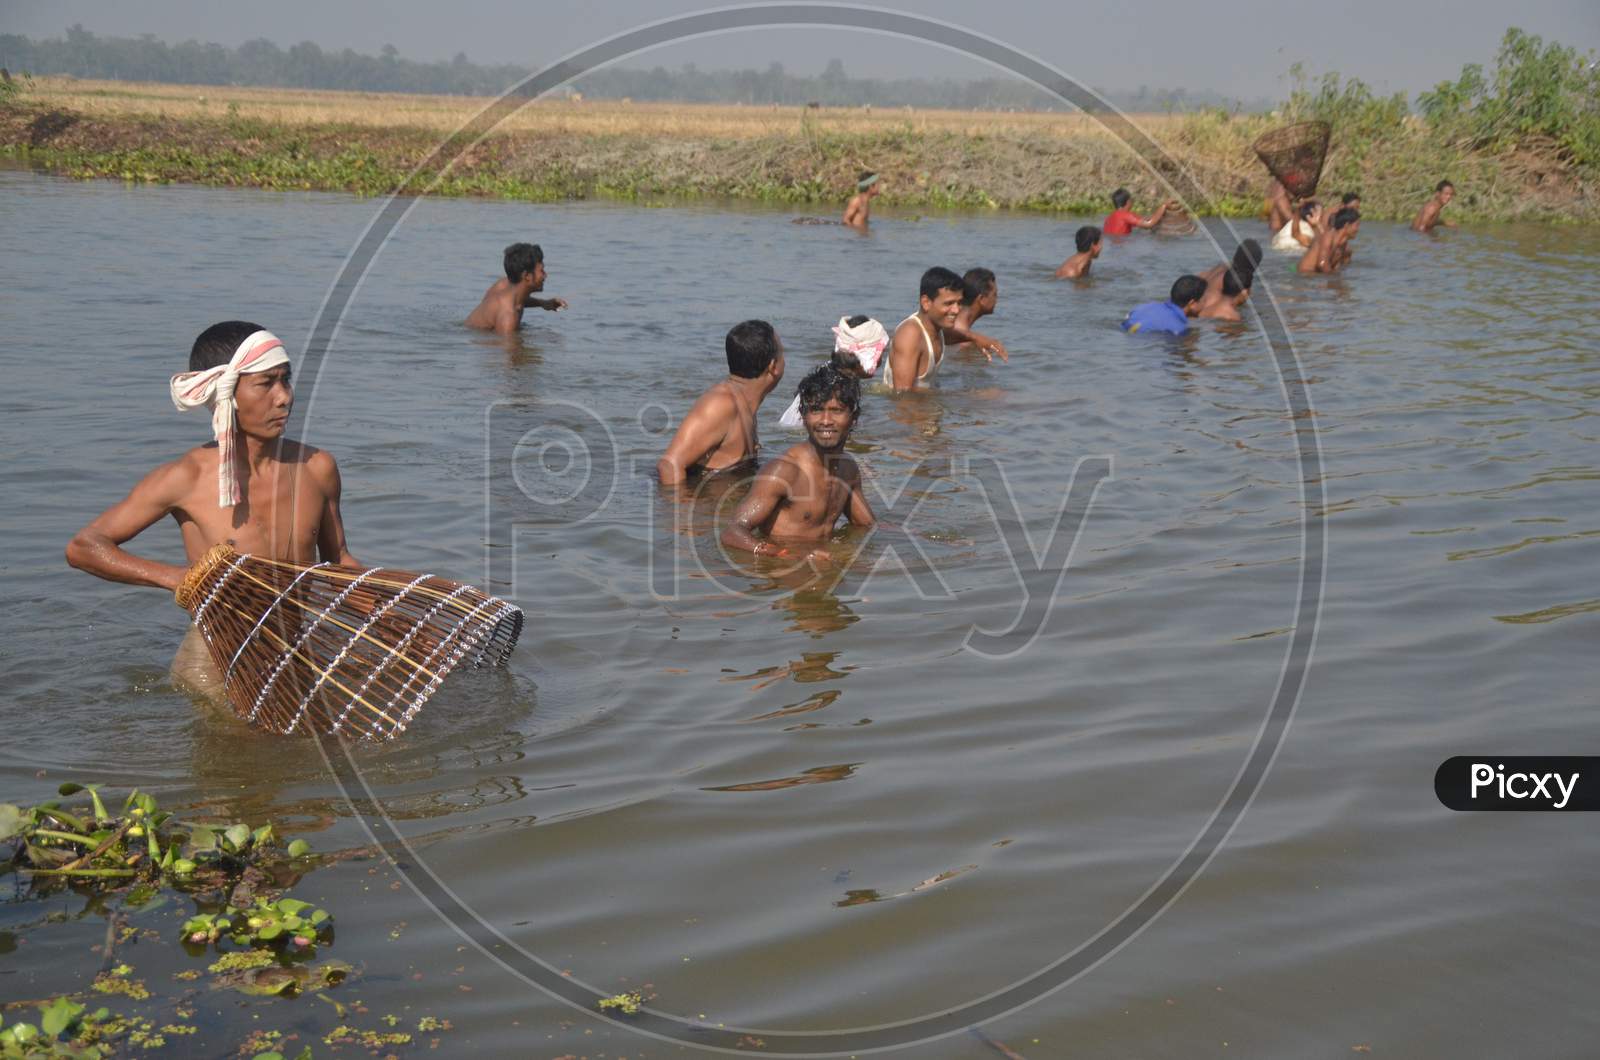 Indian villagers participate in community fishing during the Bhogali Bihu or Magh Bihu celebration at Phuloguri village in Nagaon district of northeastern Assam state on January 14, 2015.